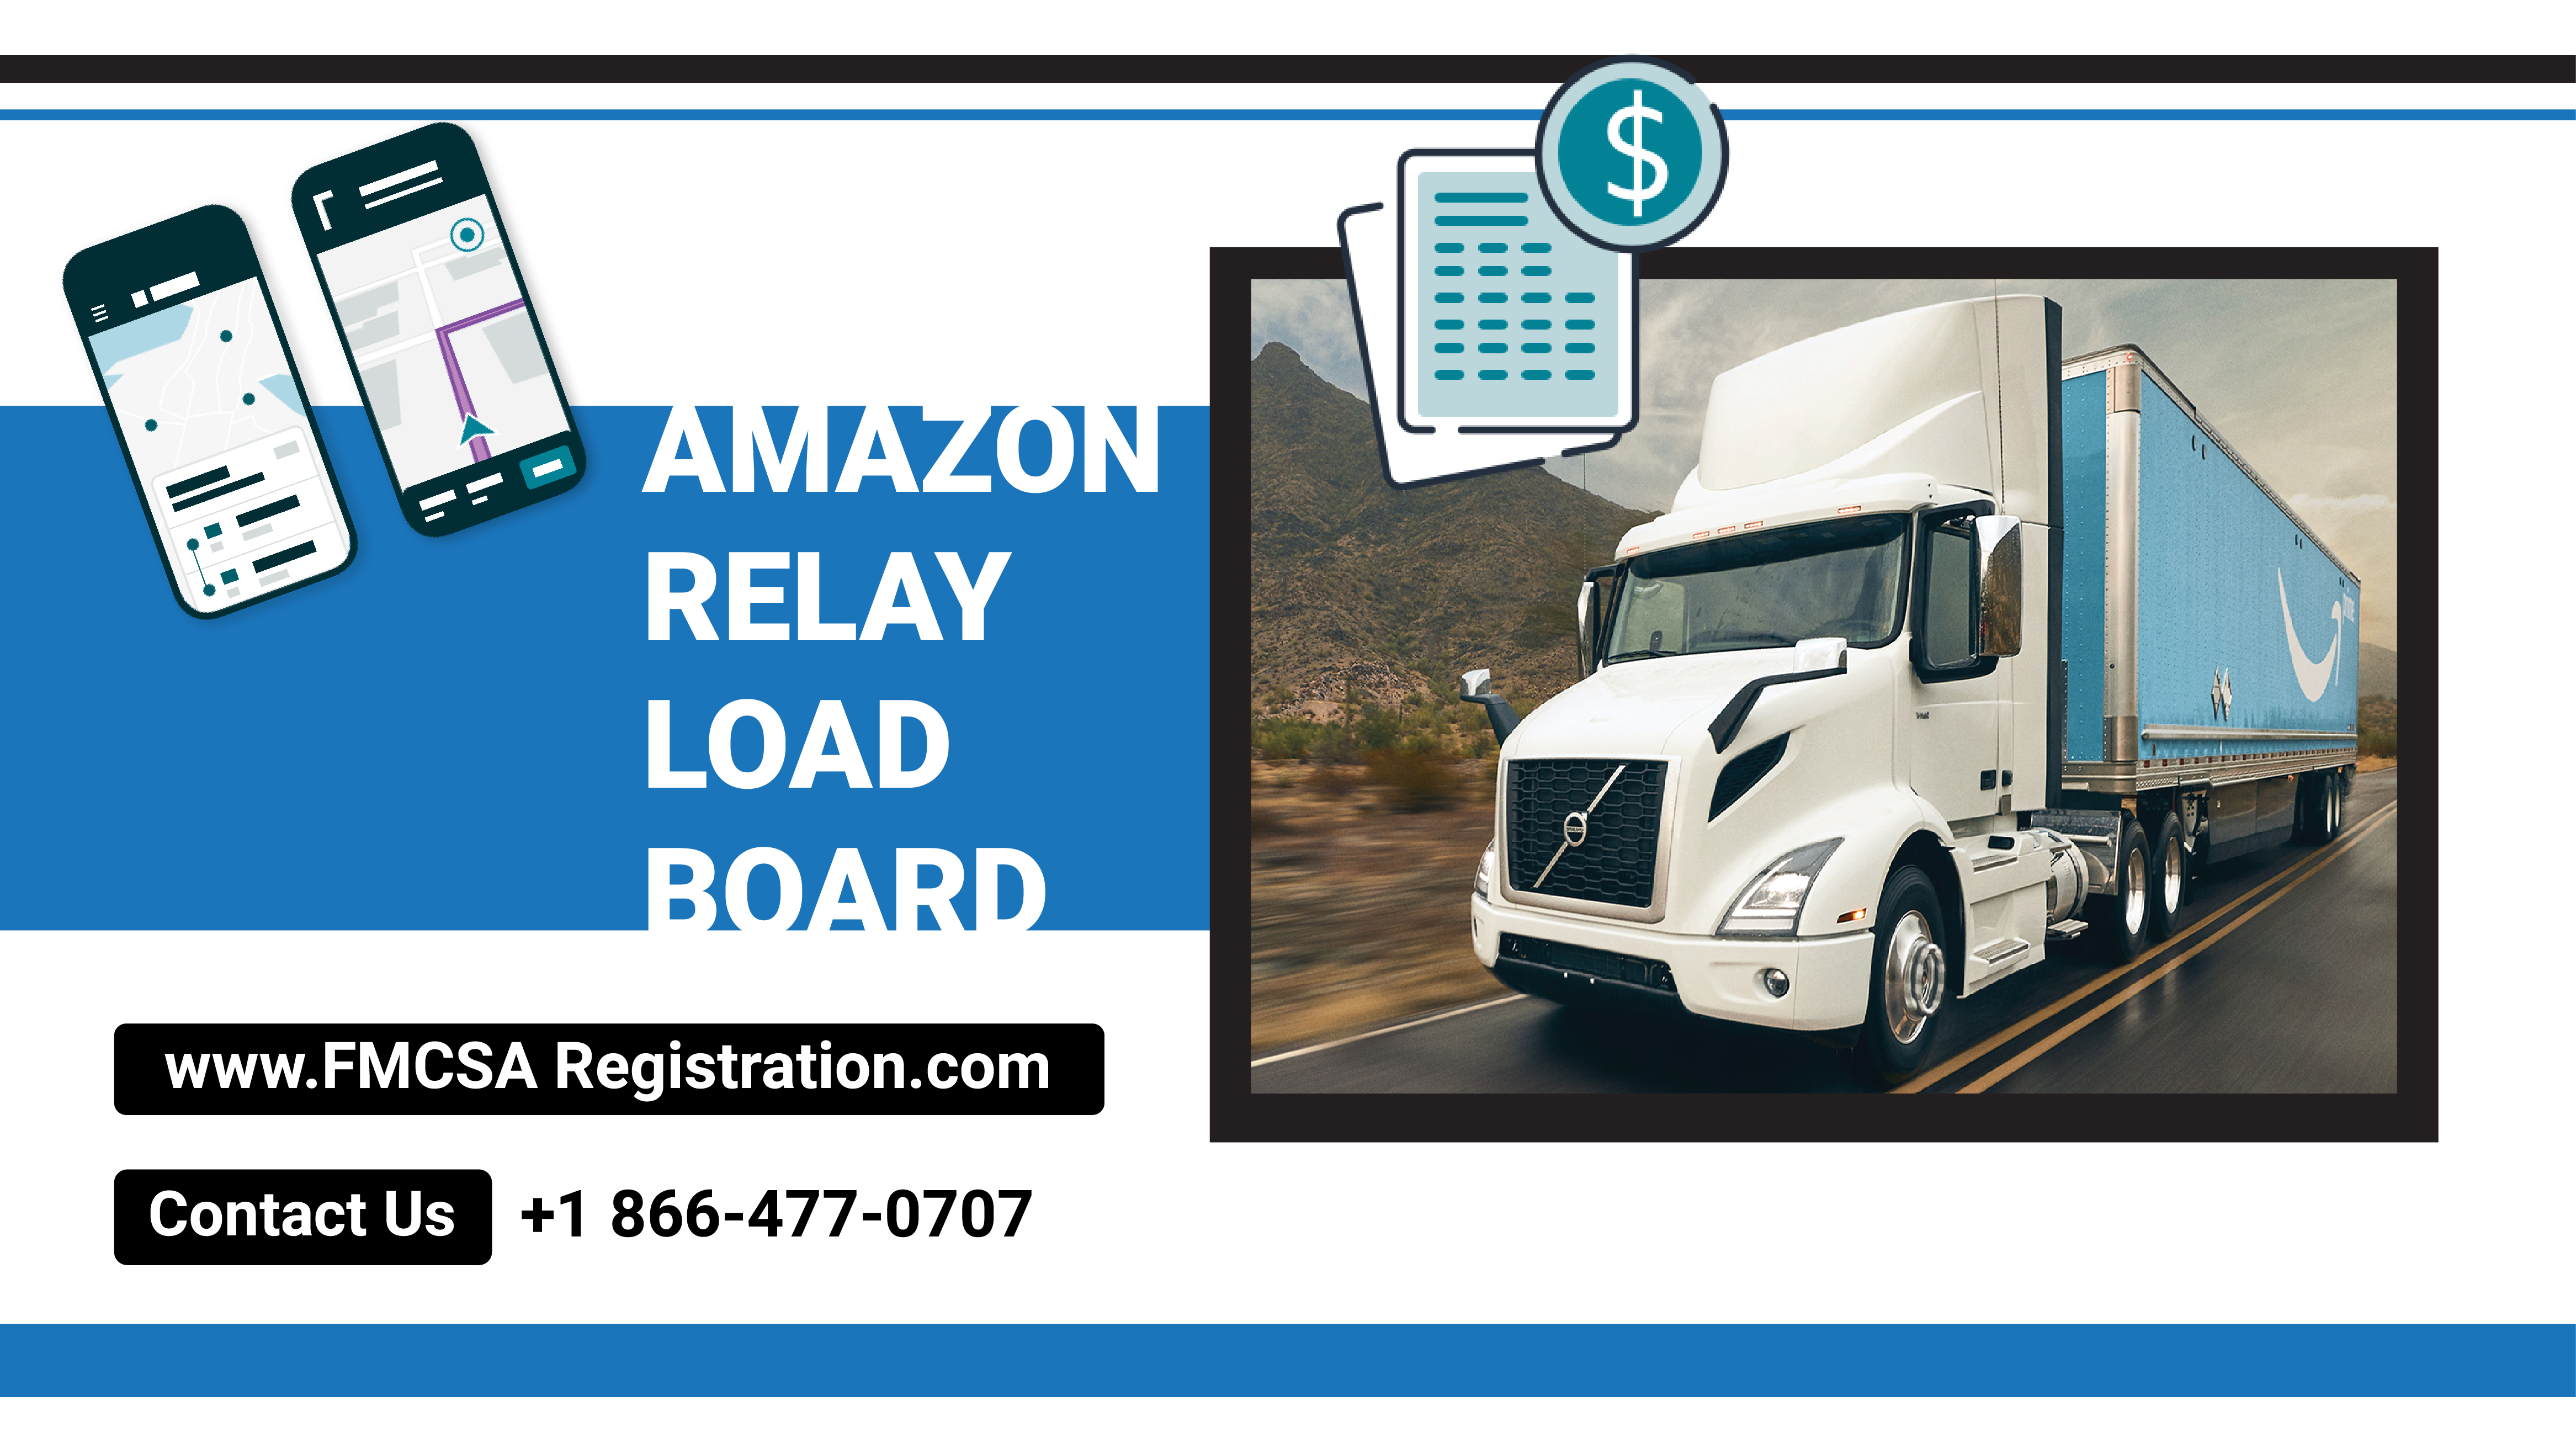 Amazon Relay Box Truck Requirements  product image reference 5